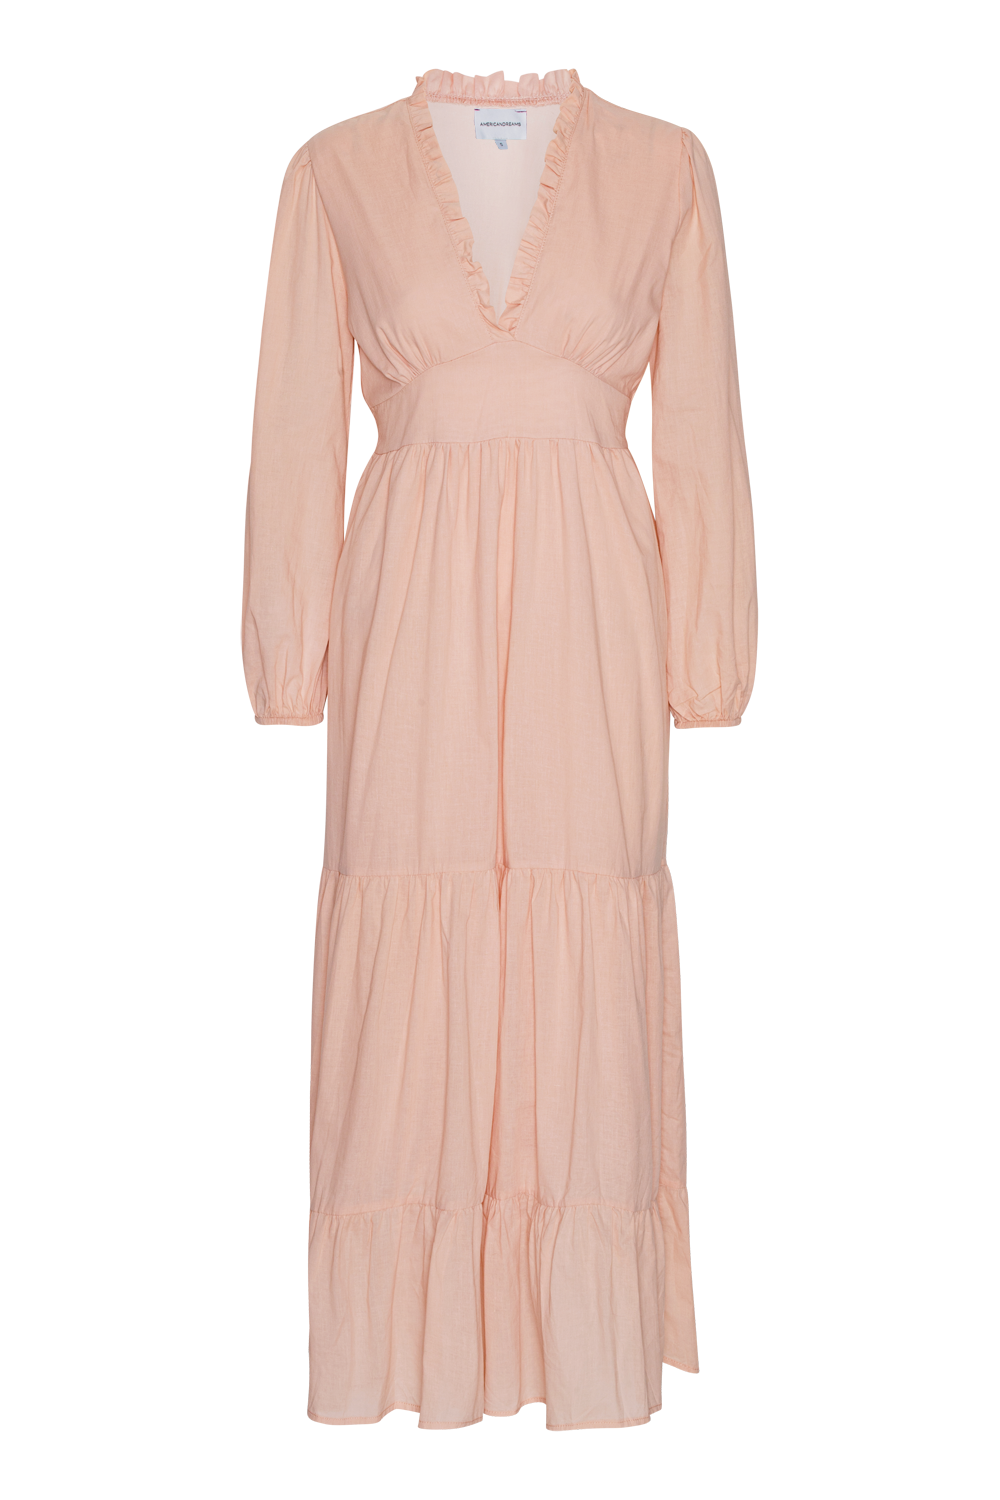 Umi Long Solid Cotton Light Pink